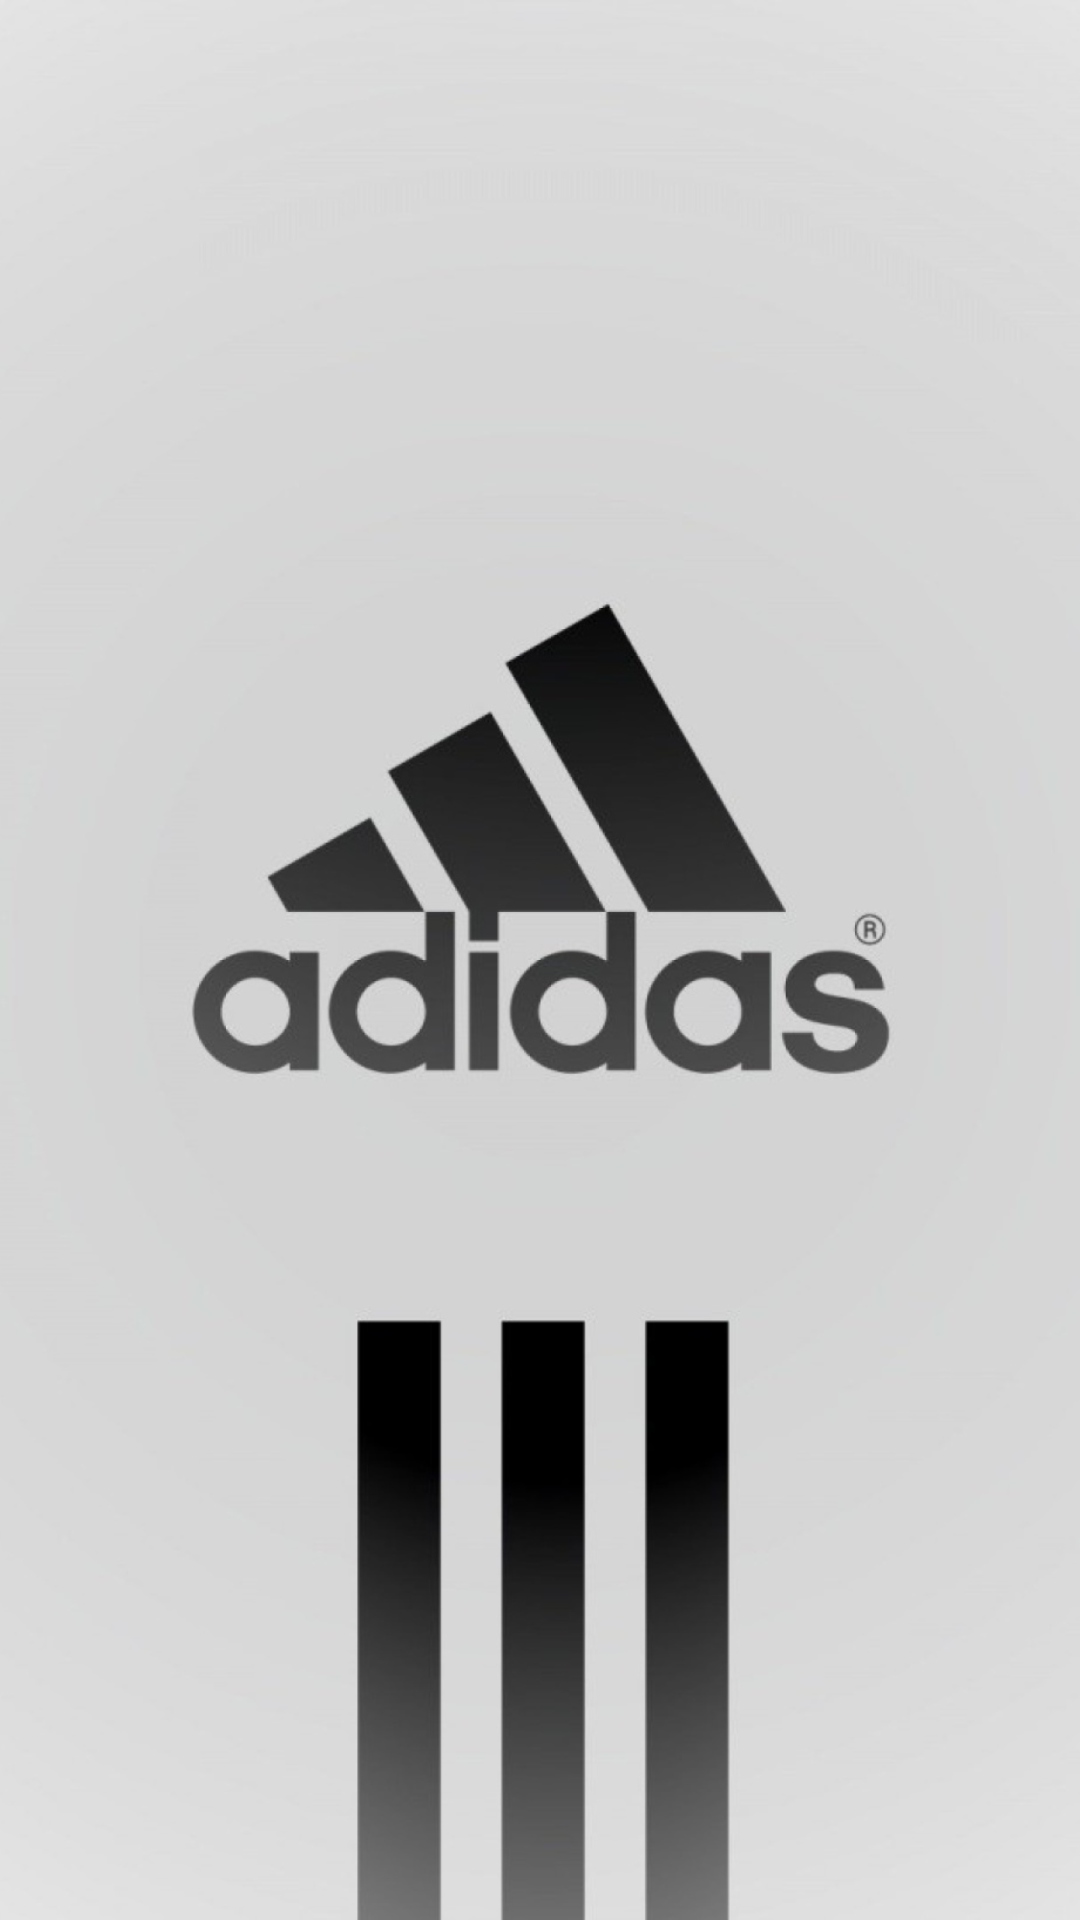 wallpaper adidas for iphone